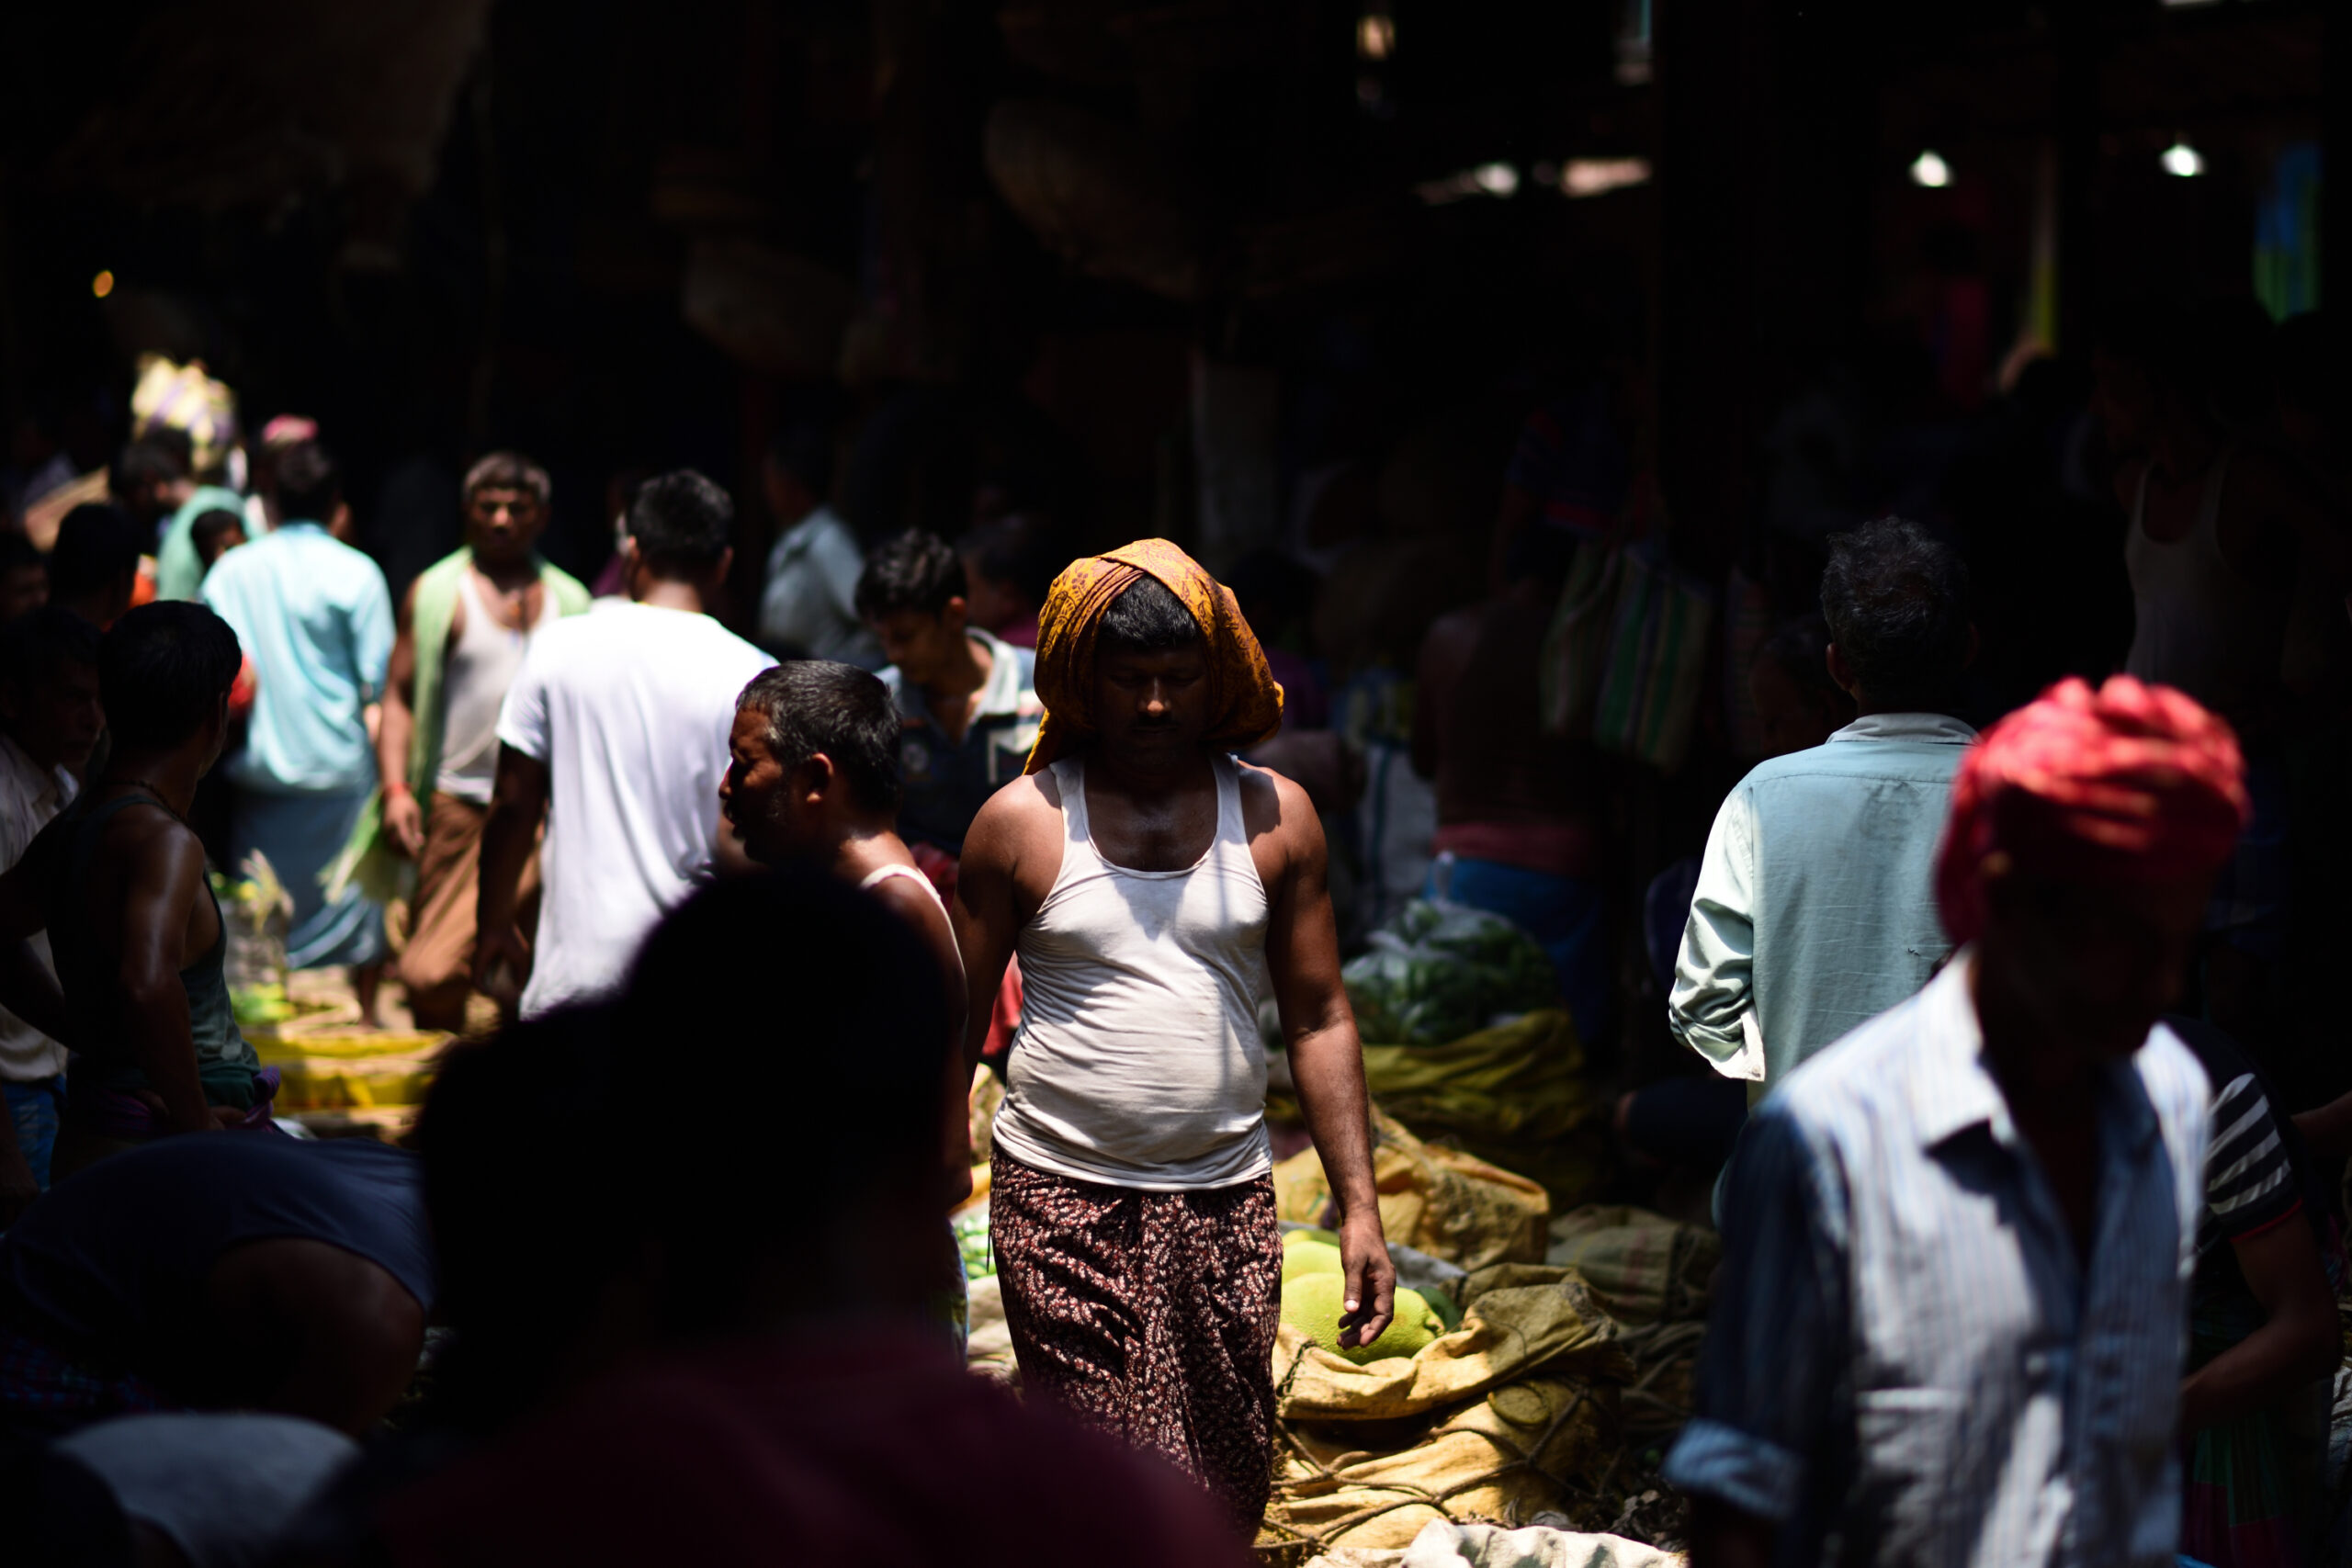 A crowded market in Kolkata India. The market is quite dark with a ray of light through the centre, illuminating a strip of people.